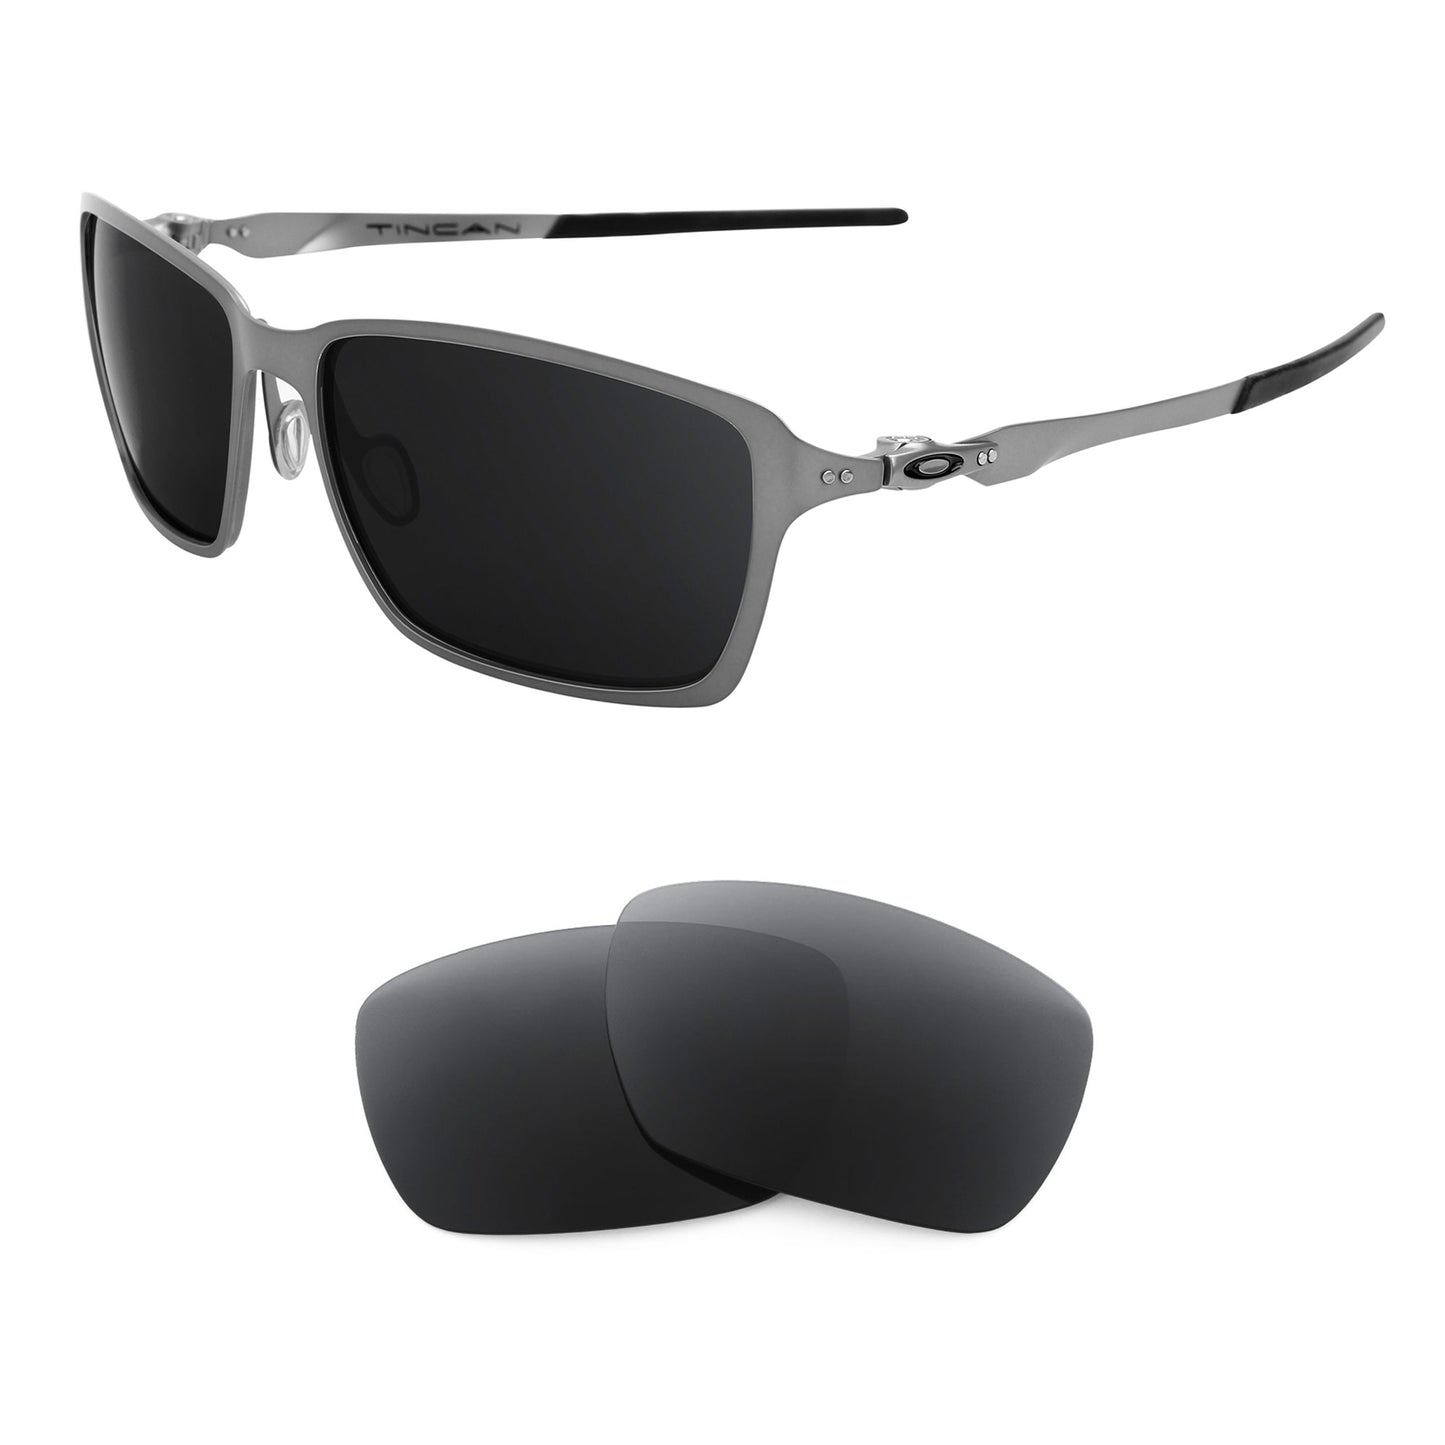 Oakley Tincan sunglasses with replacement lenses